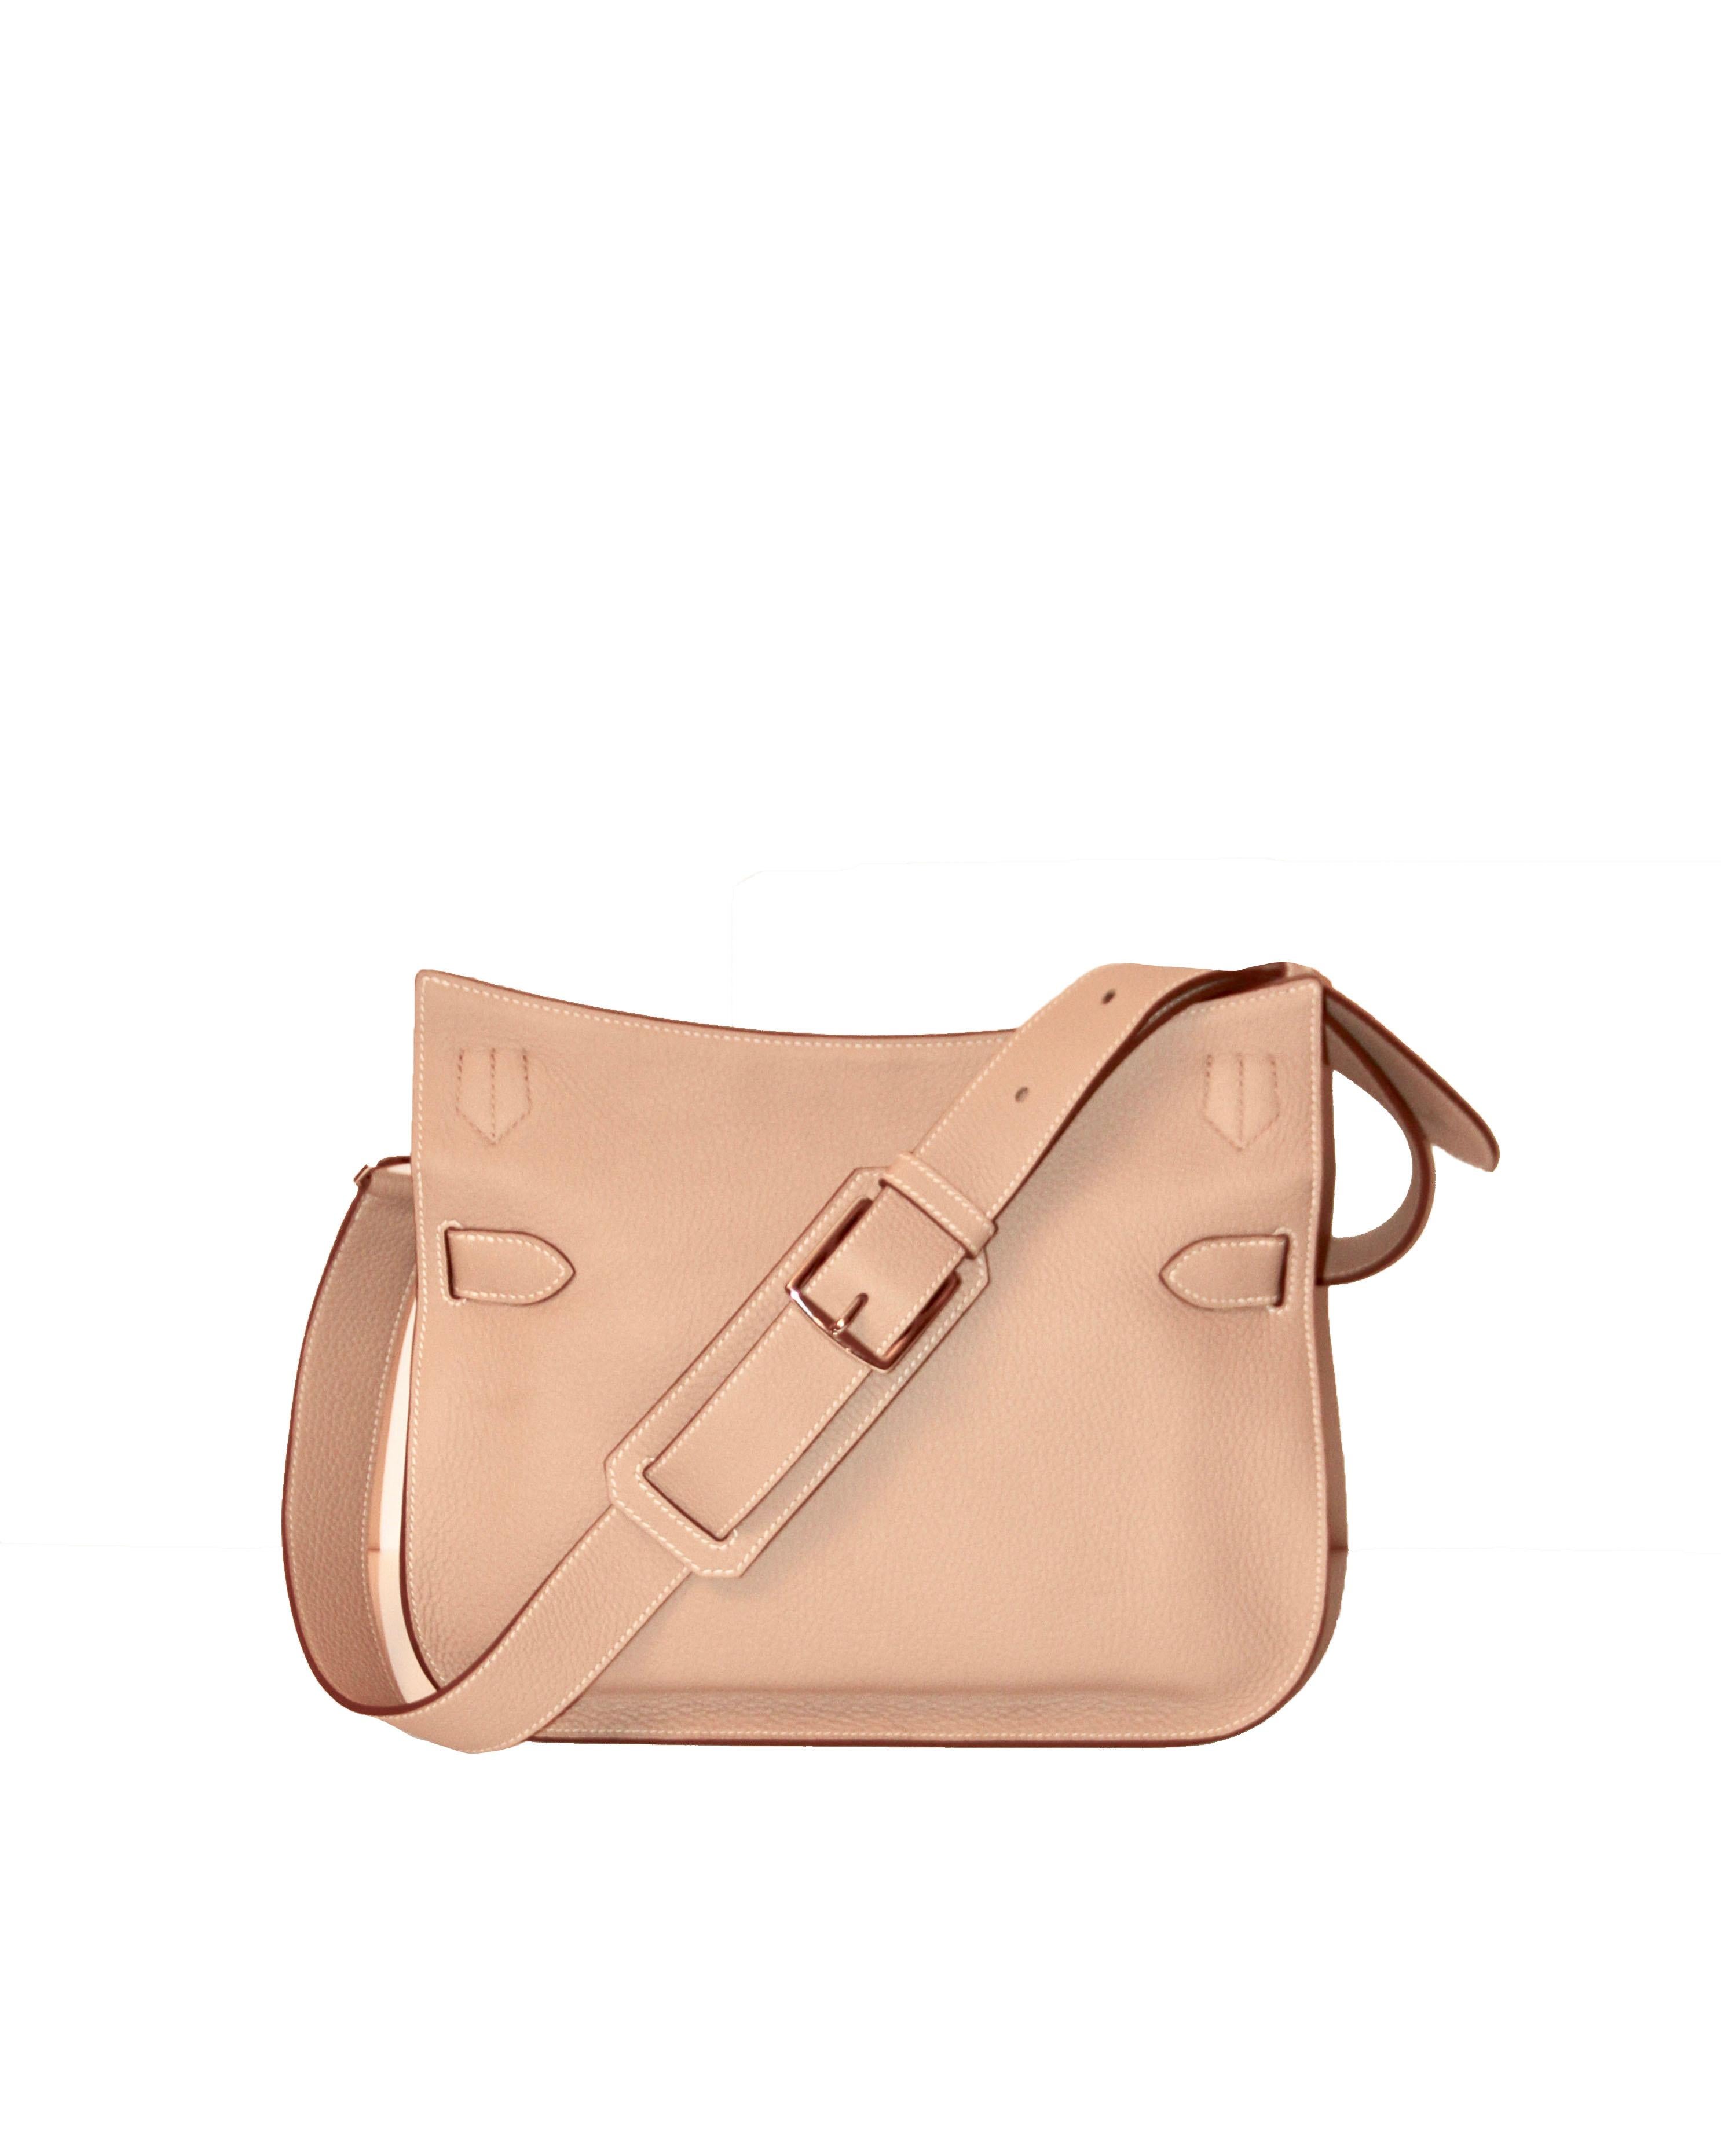 Elegant crossbody Jypsiere 28 bag from the House of Hermes. 
Comes with an adjustable shoulder strap

Year: 2013
Fabric: Togo Leather
Color: Chalk 
Hardware: Palladium plated 
Measurements: L 28 cm x H 21 cm x P 12 cm - L 11 x H 8.3 x W 4.7 Inches